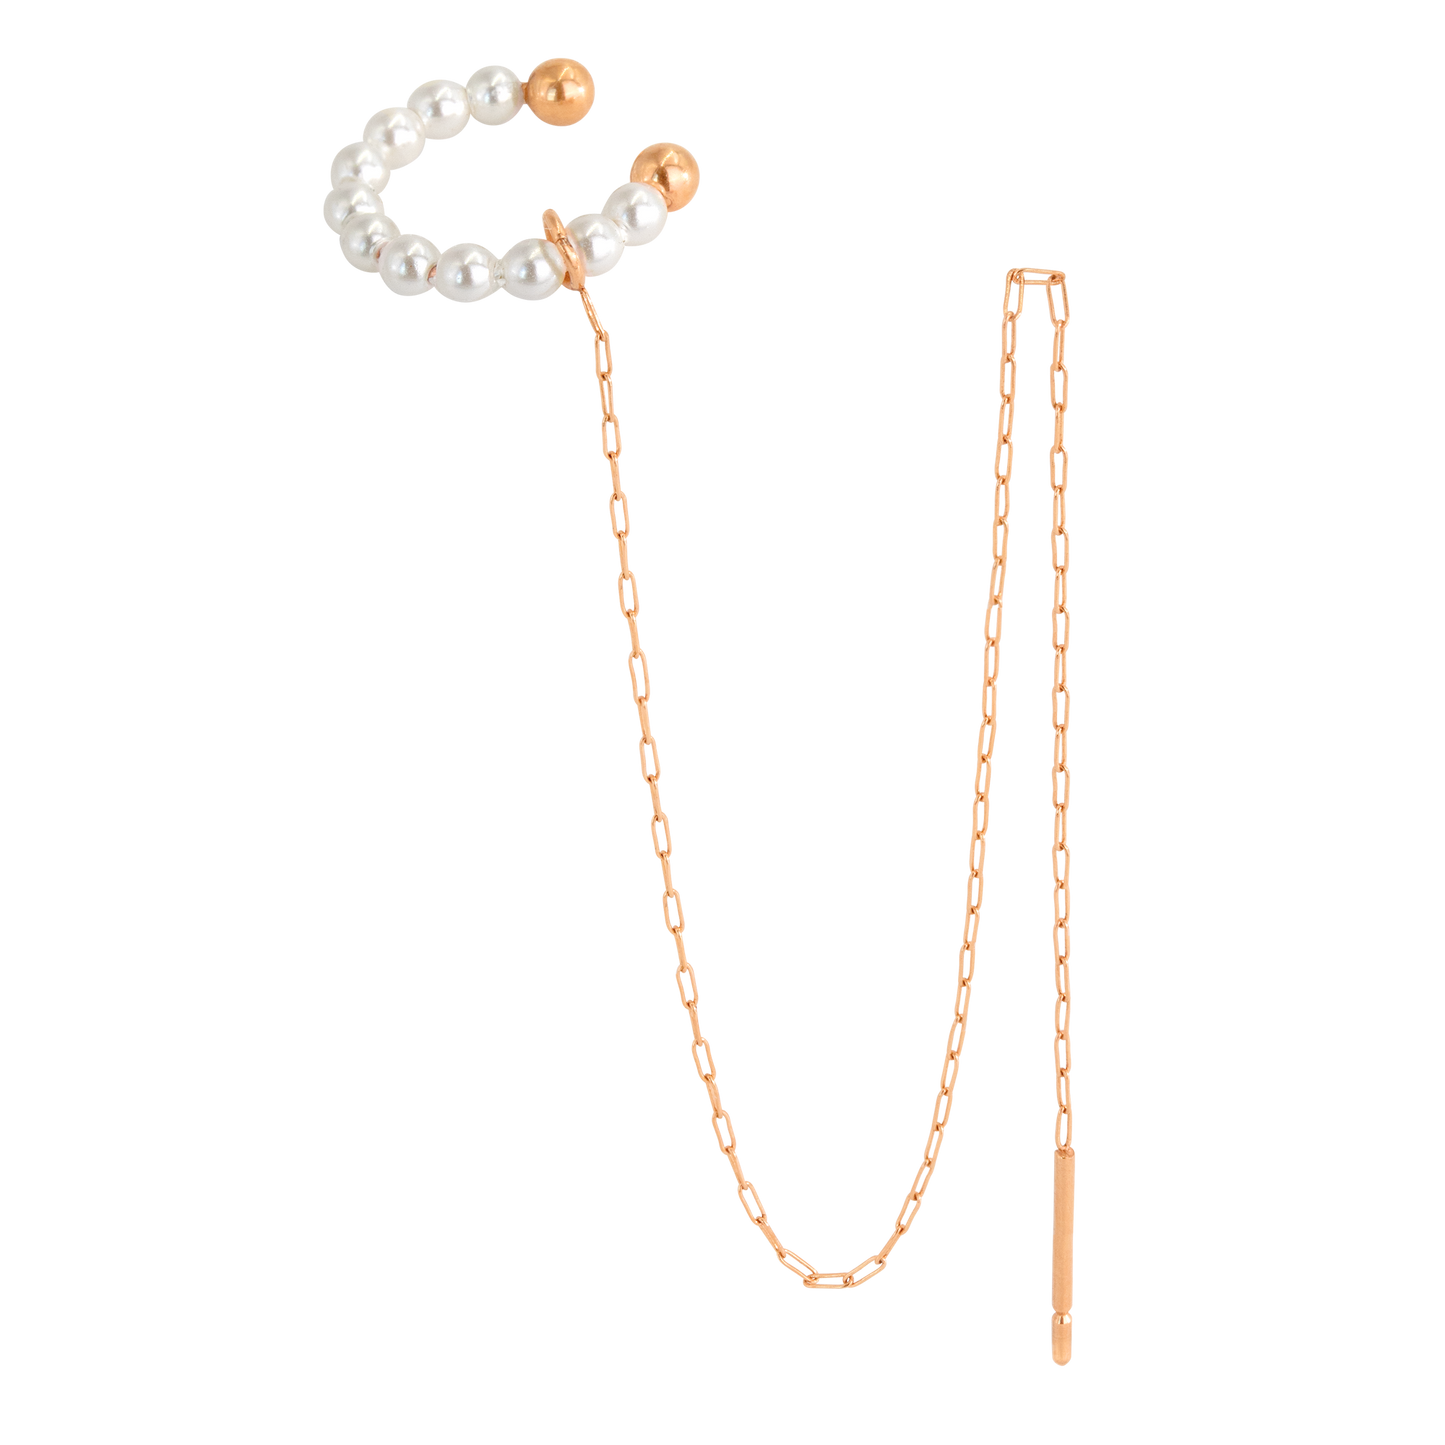 Krissis Special Pearl Ear Cuff Rose Gold